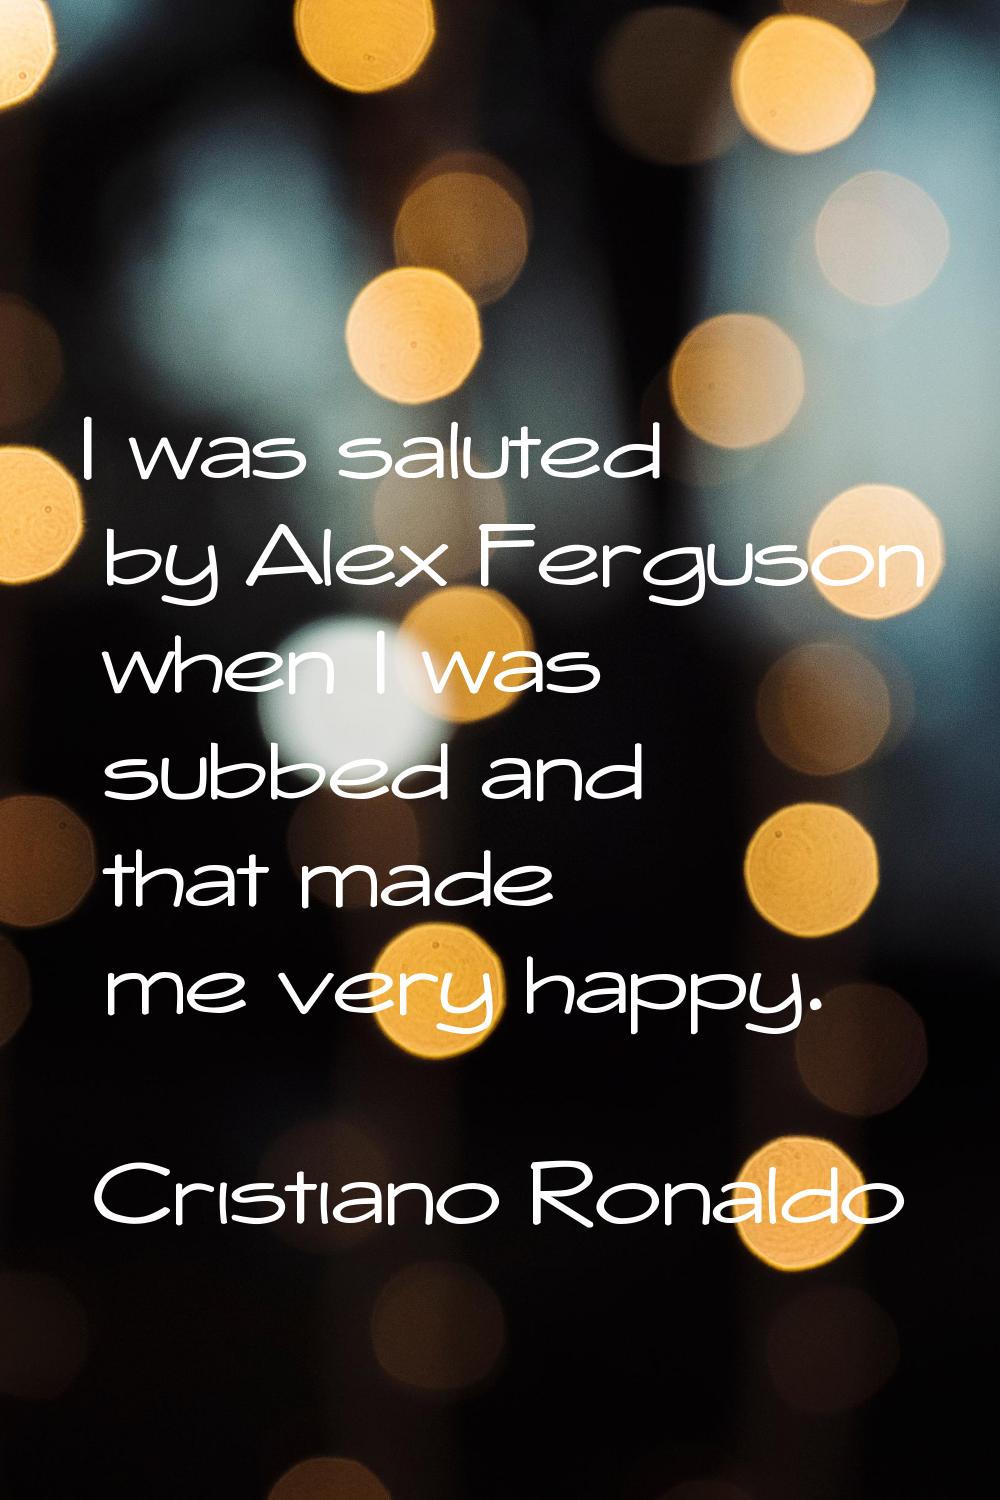 I was saluted by Alex Ferguson when I was subbed and that made me very happy.